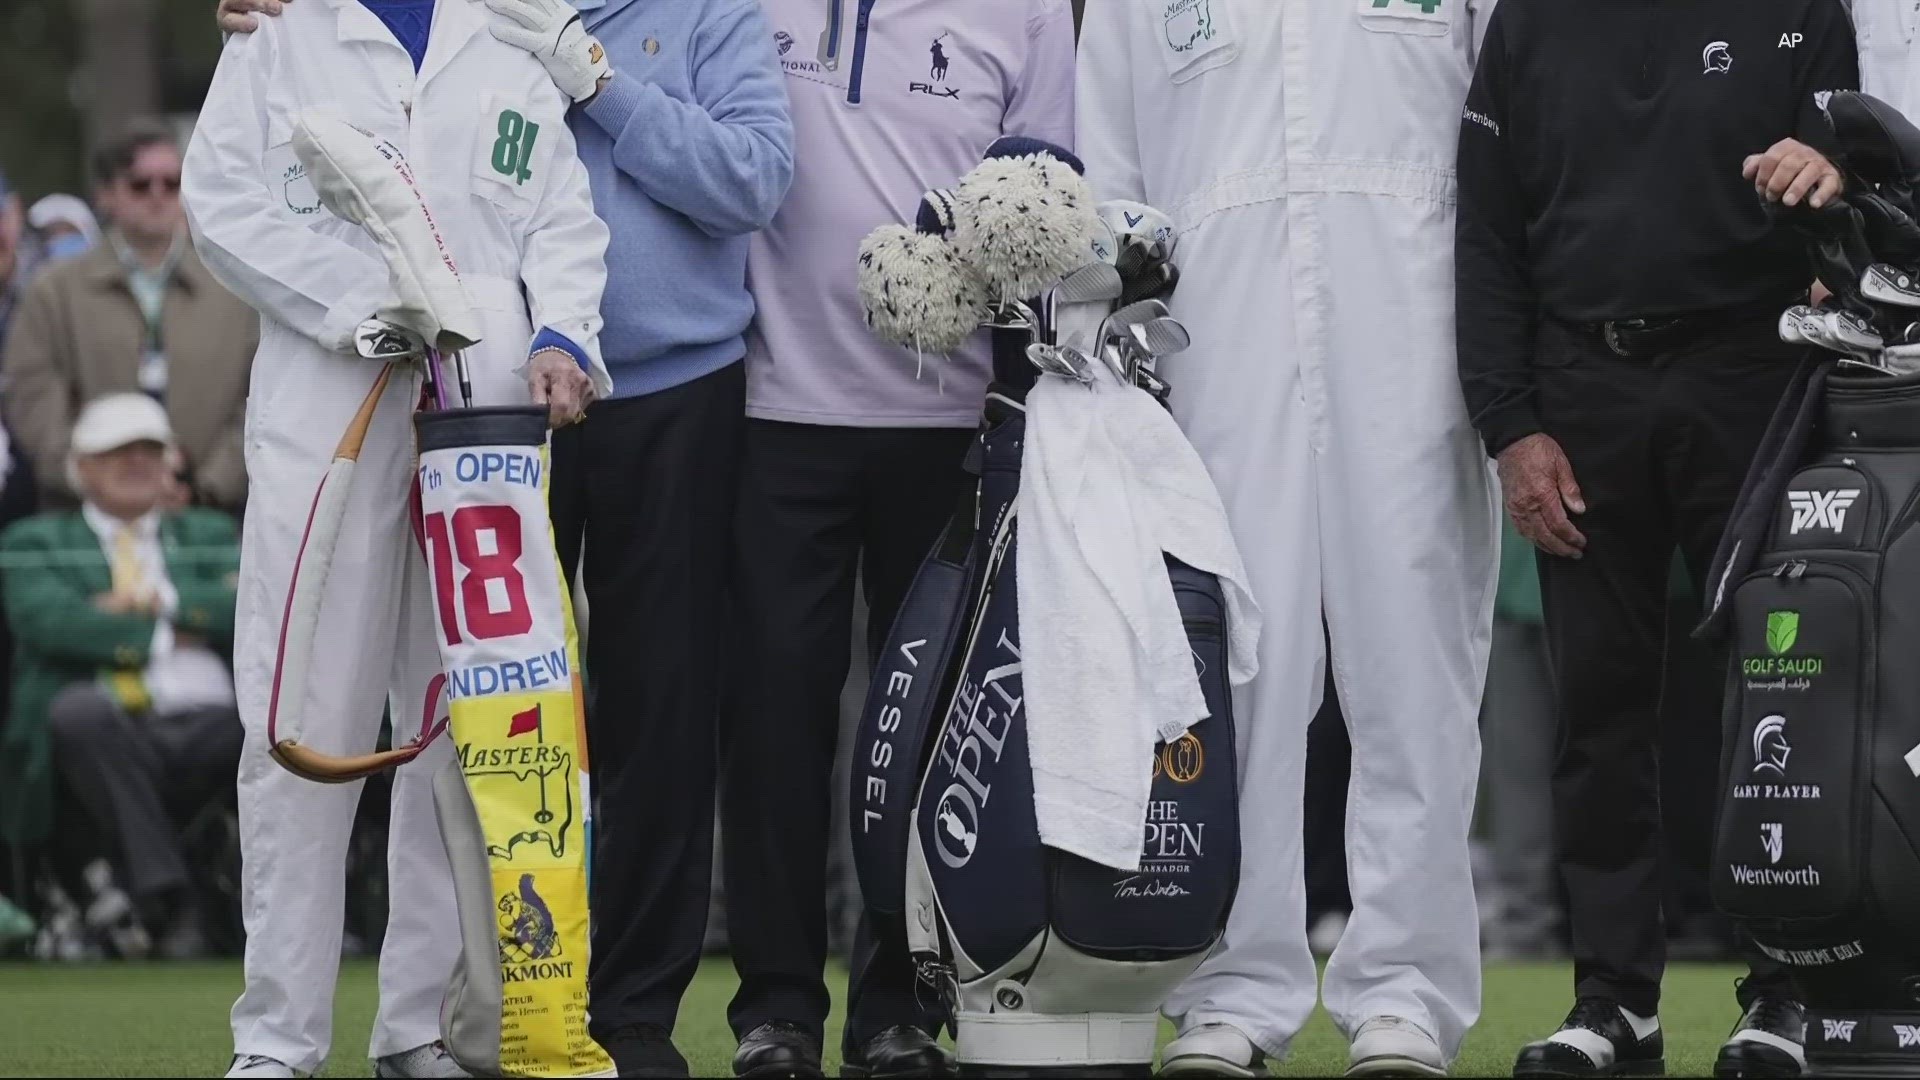 The 6-time Masters winner was gifted a bag from his grandson from Flag Bag Golf Company, seen by many at this year's tournament.